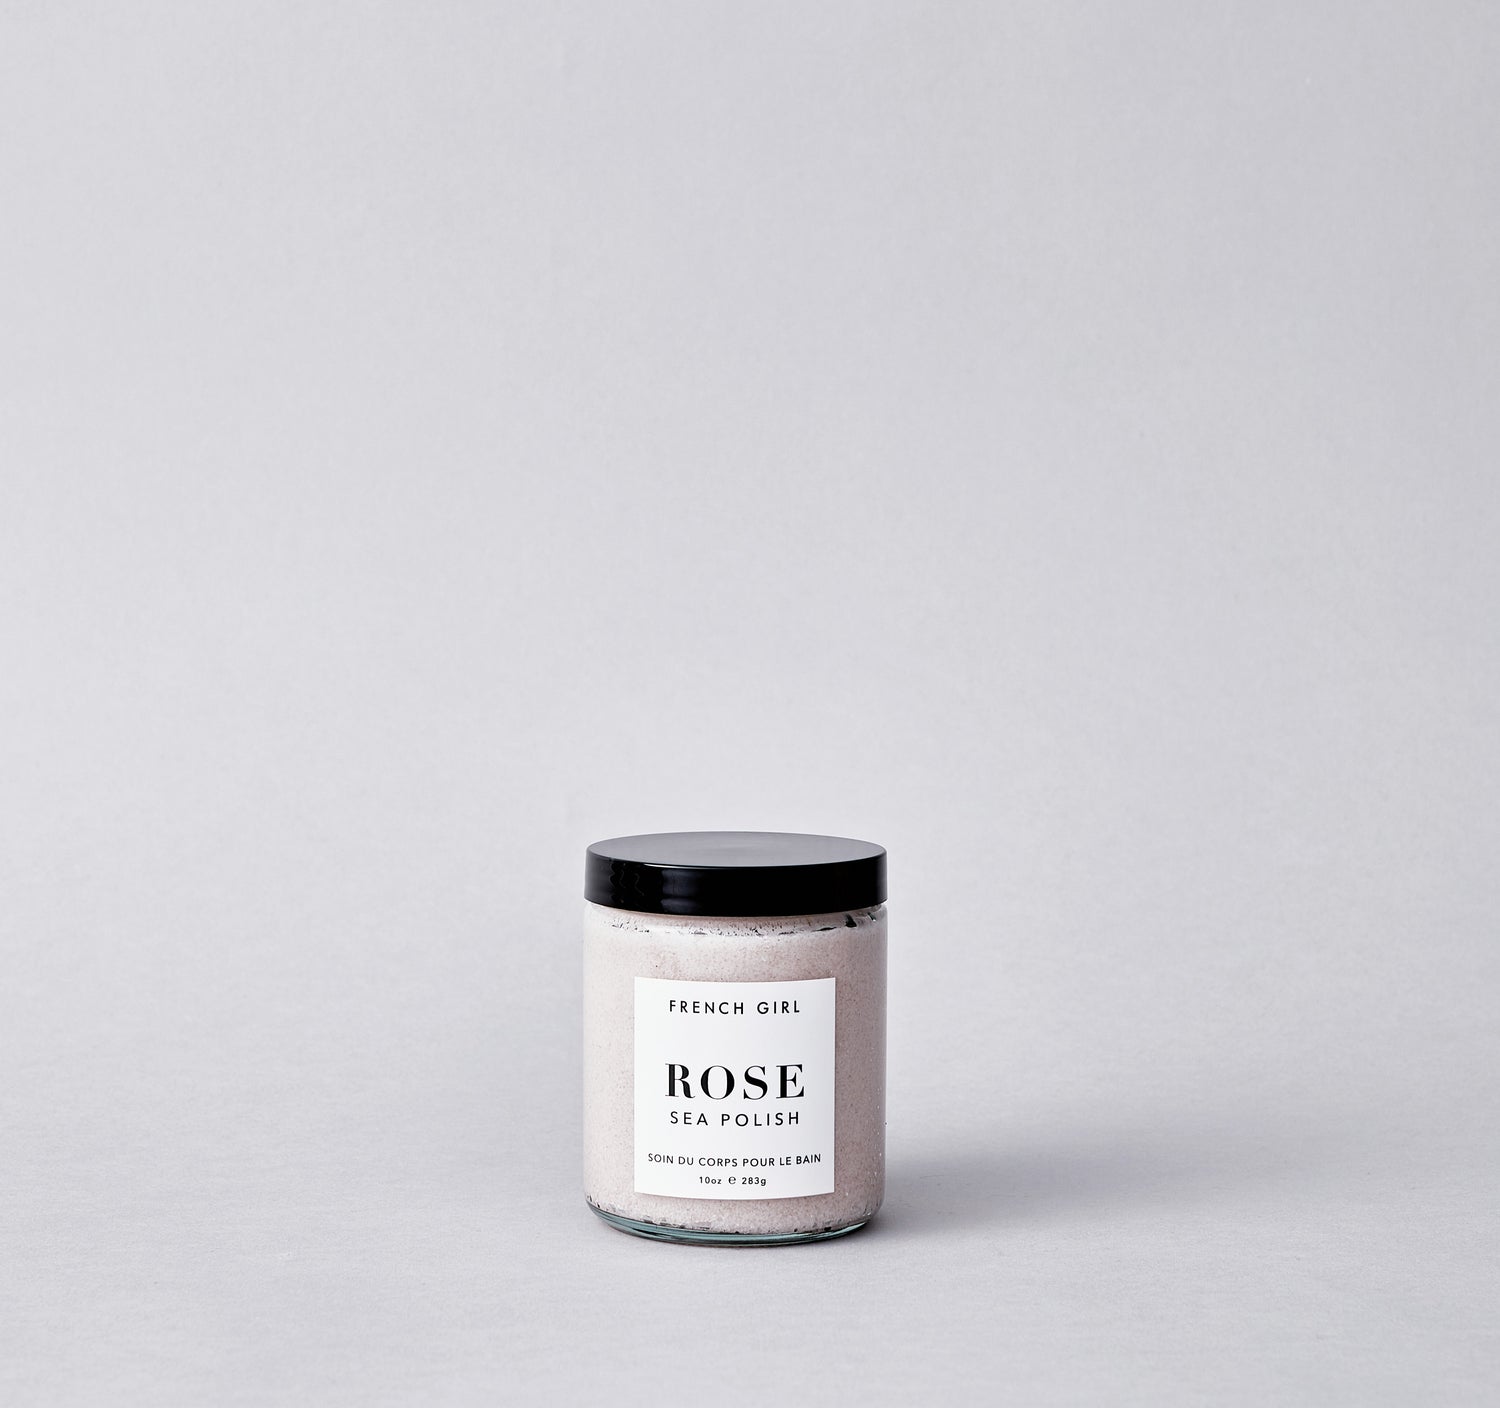 A hydrating body scrub composed of Himalayan salts, nourishing butters, and fruit oils that work to gently exfoliate, detoxify, and moisturize the skin.